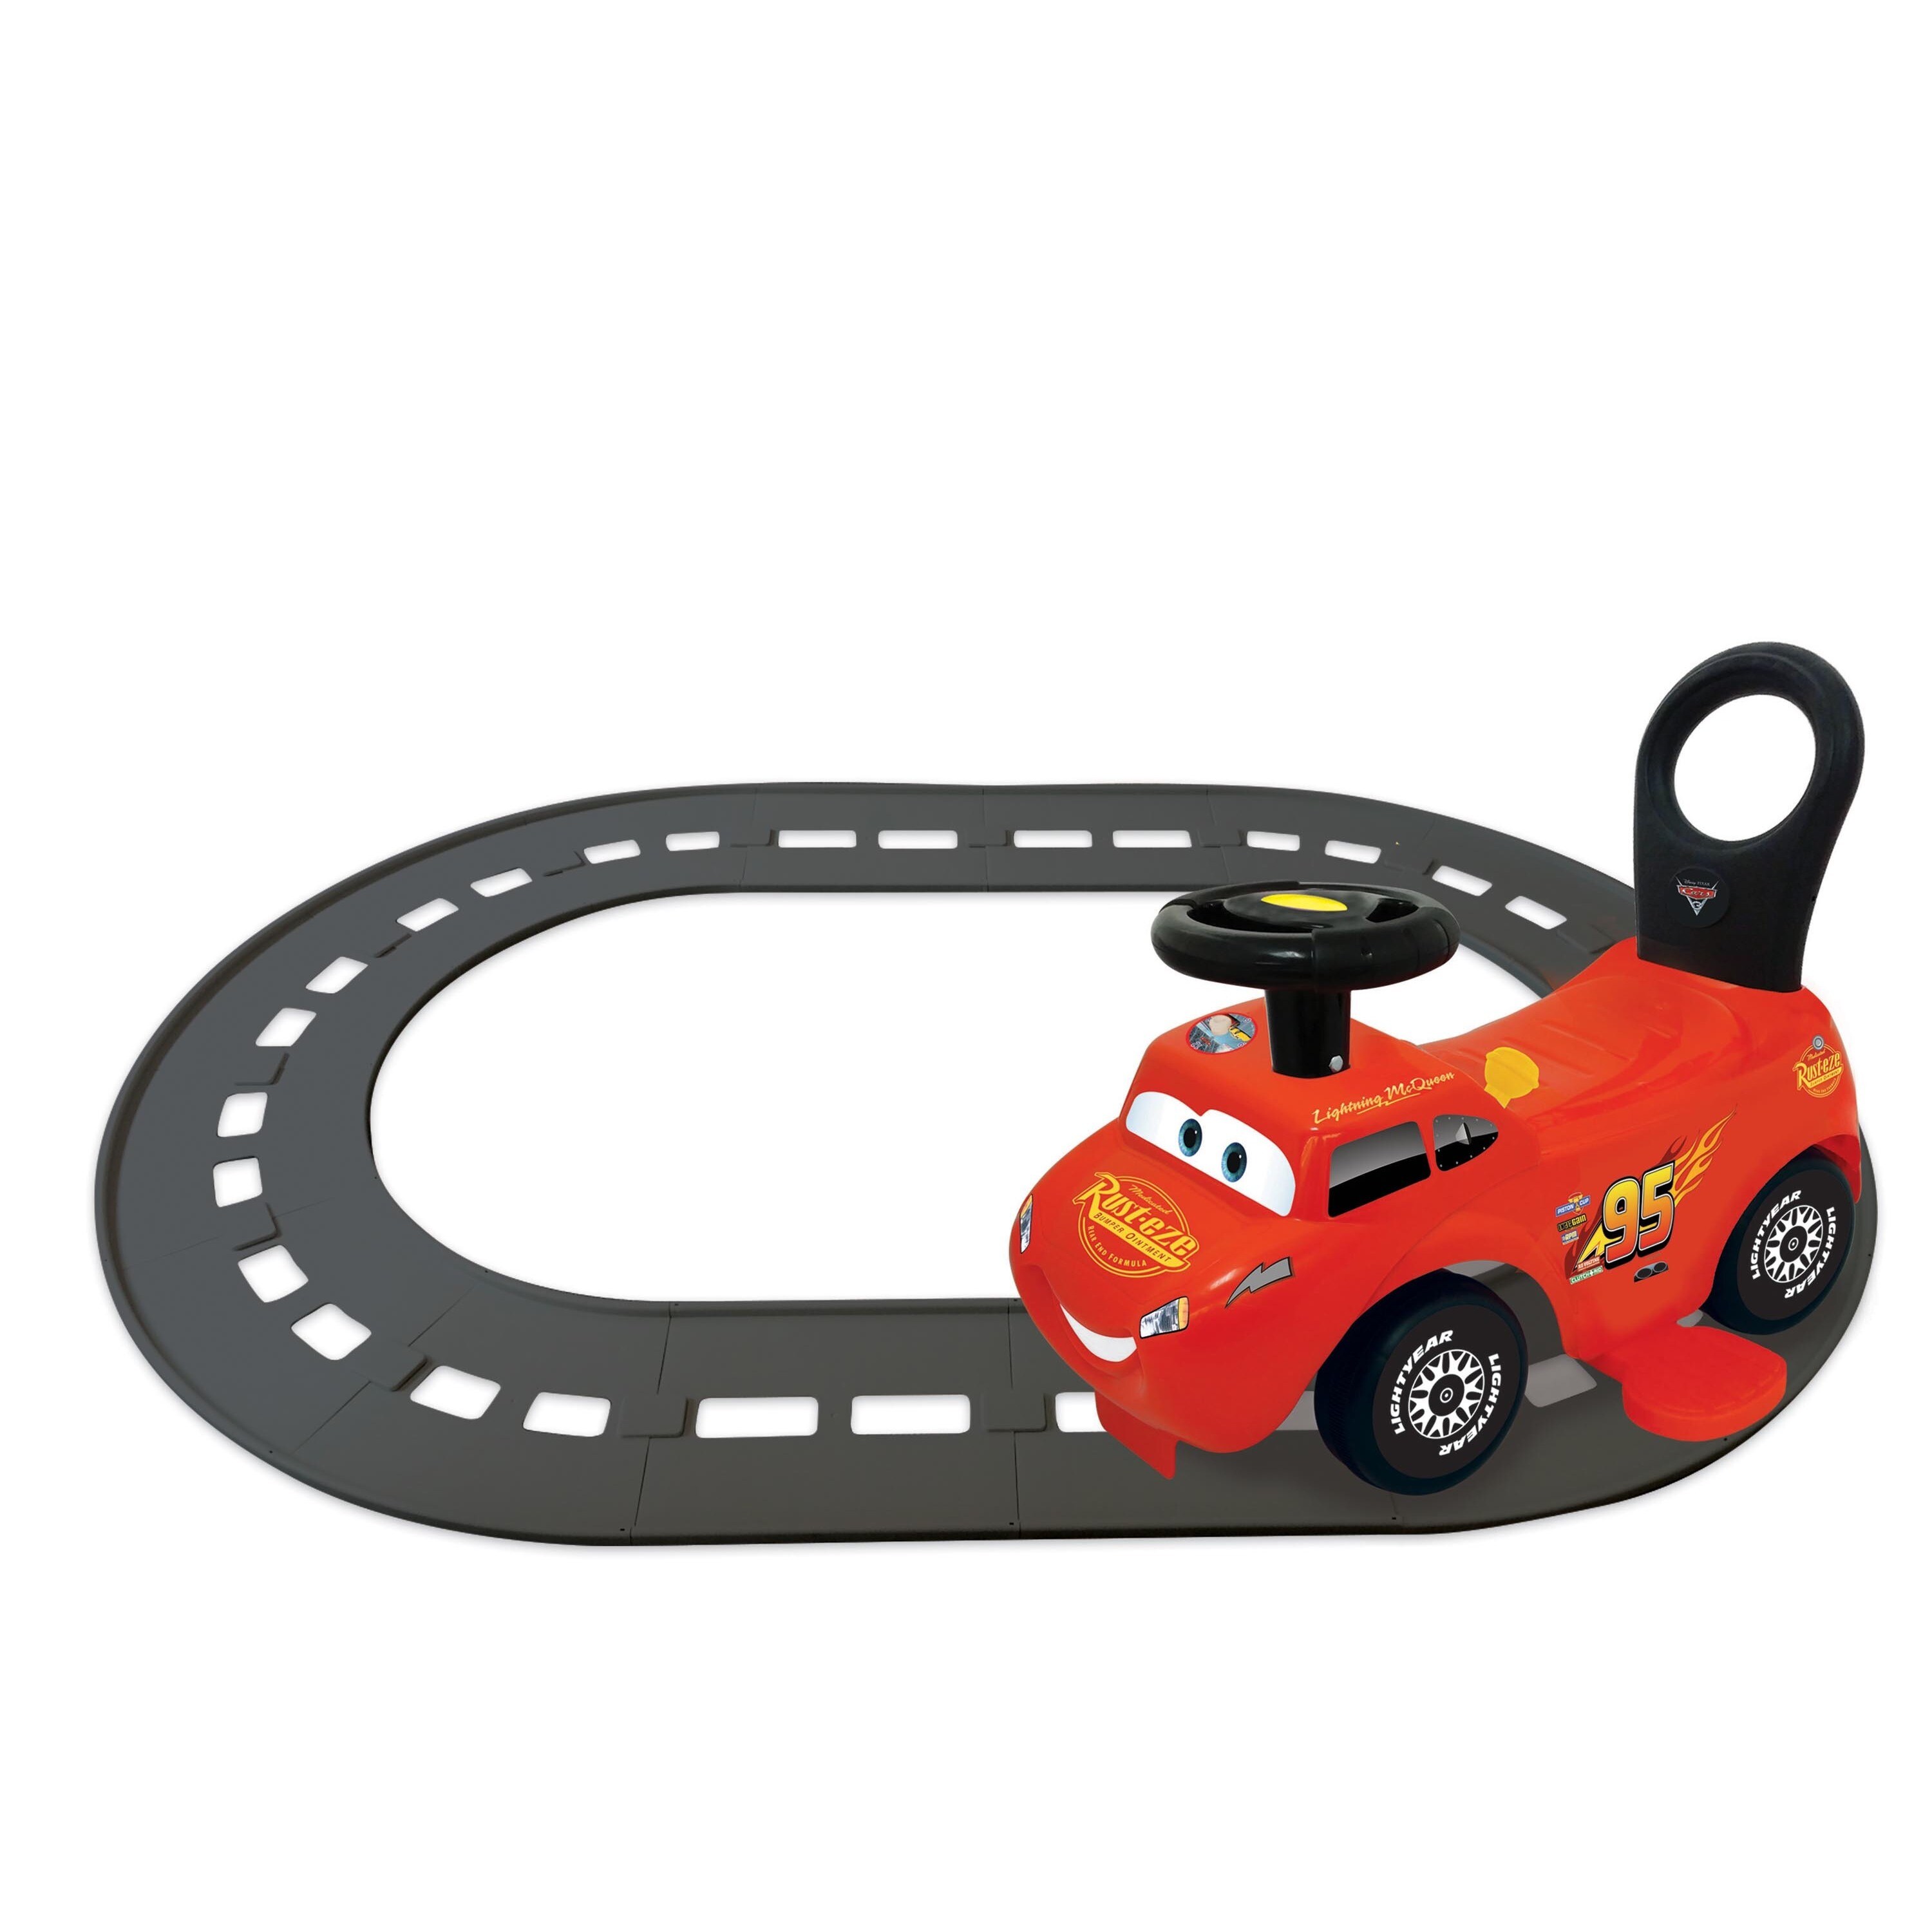 lightning mcqueen ride on car with remote control